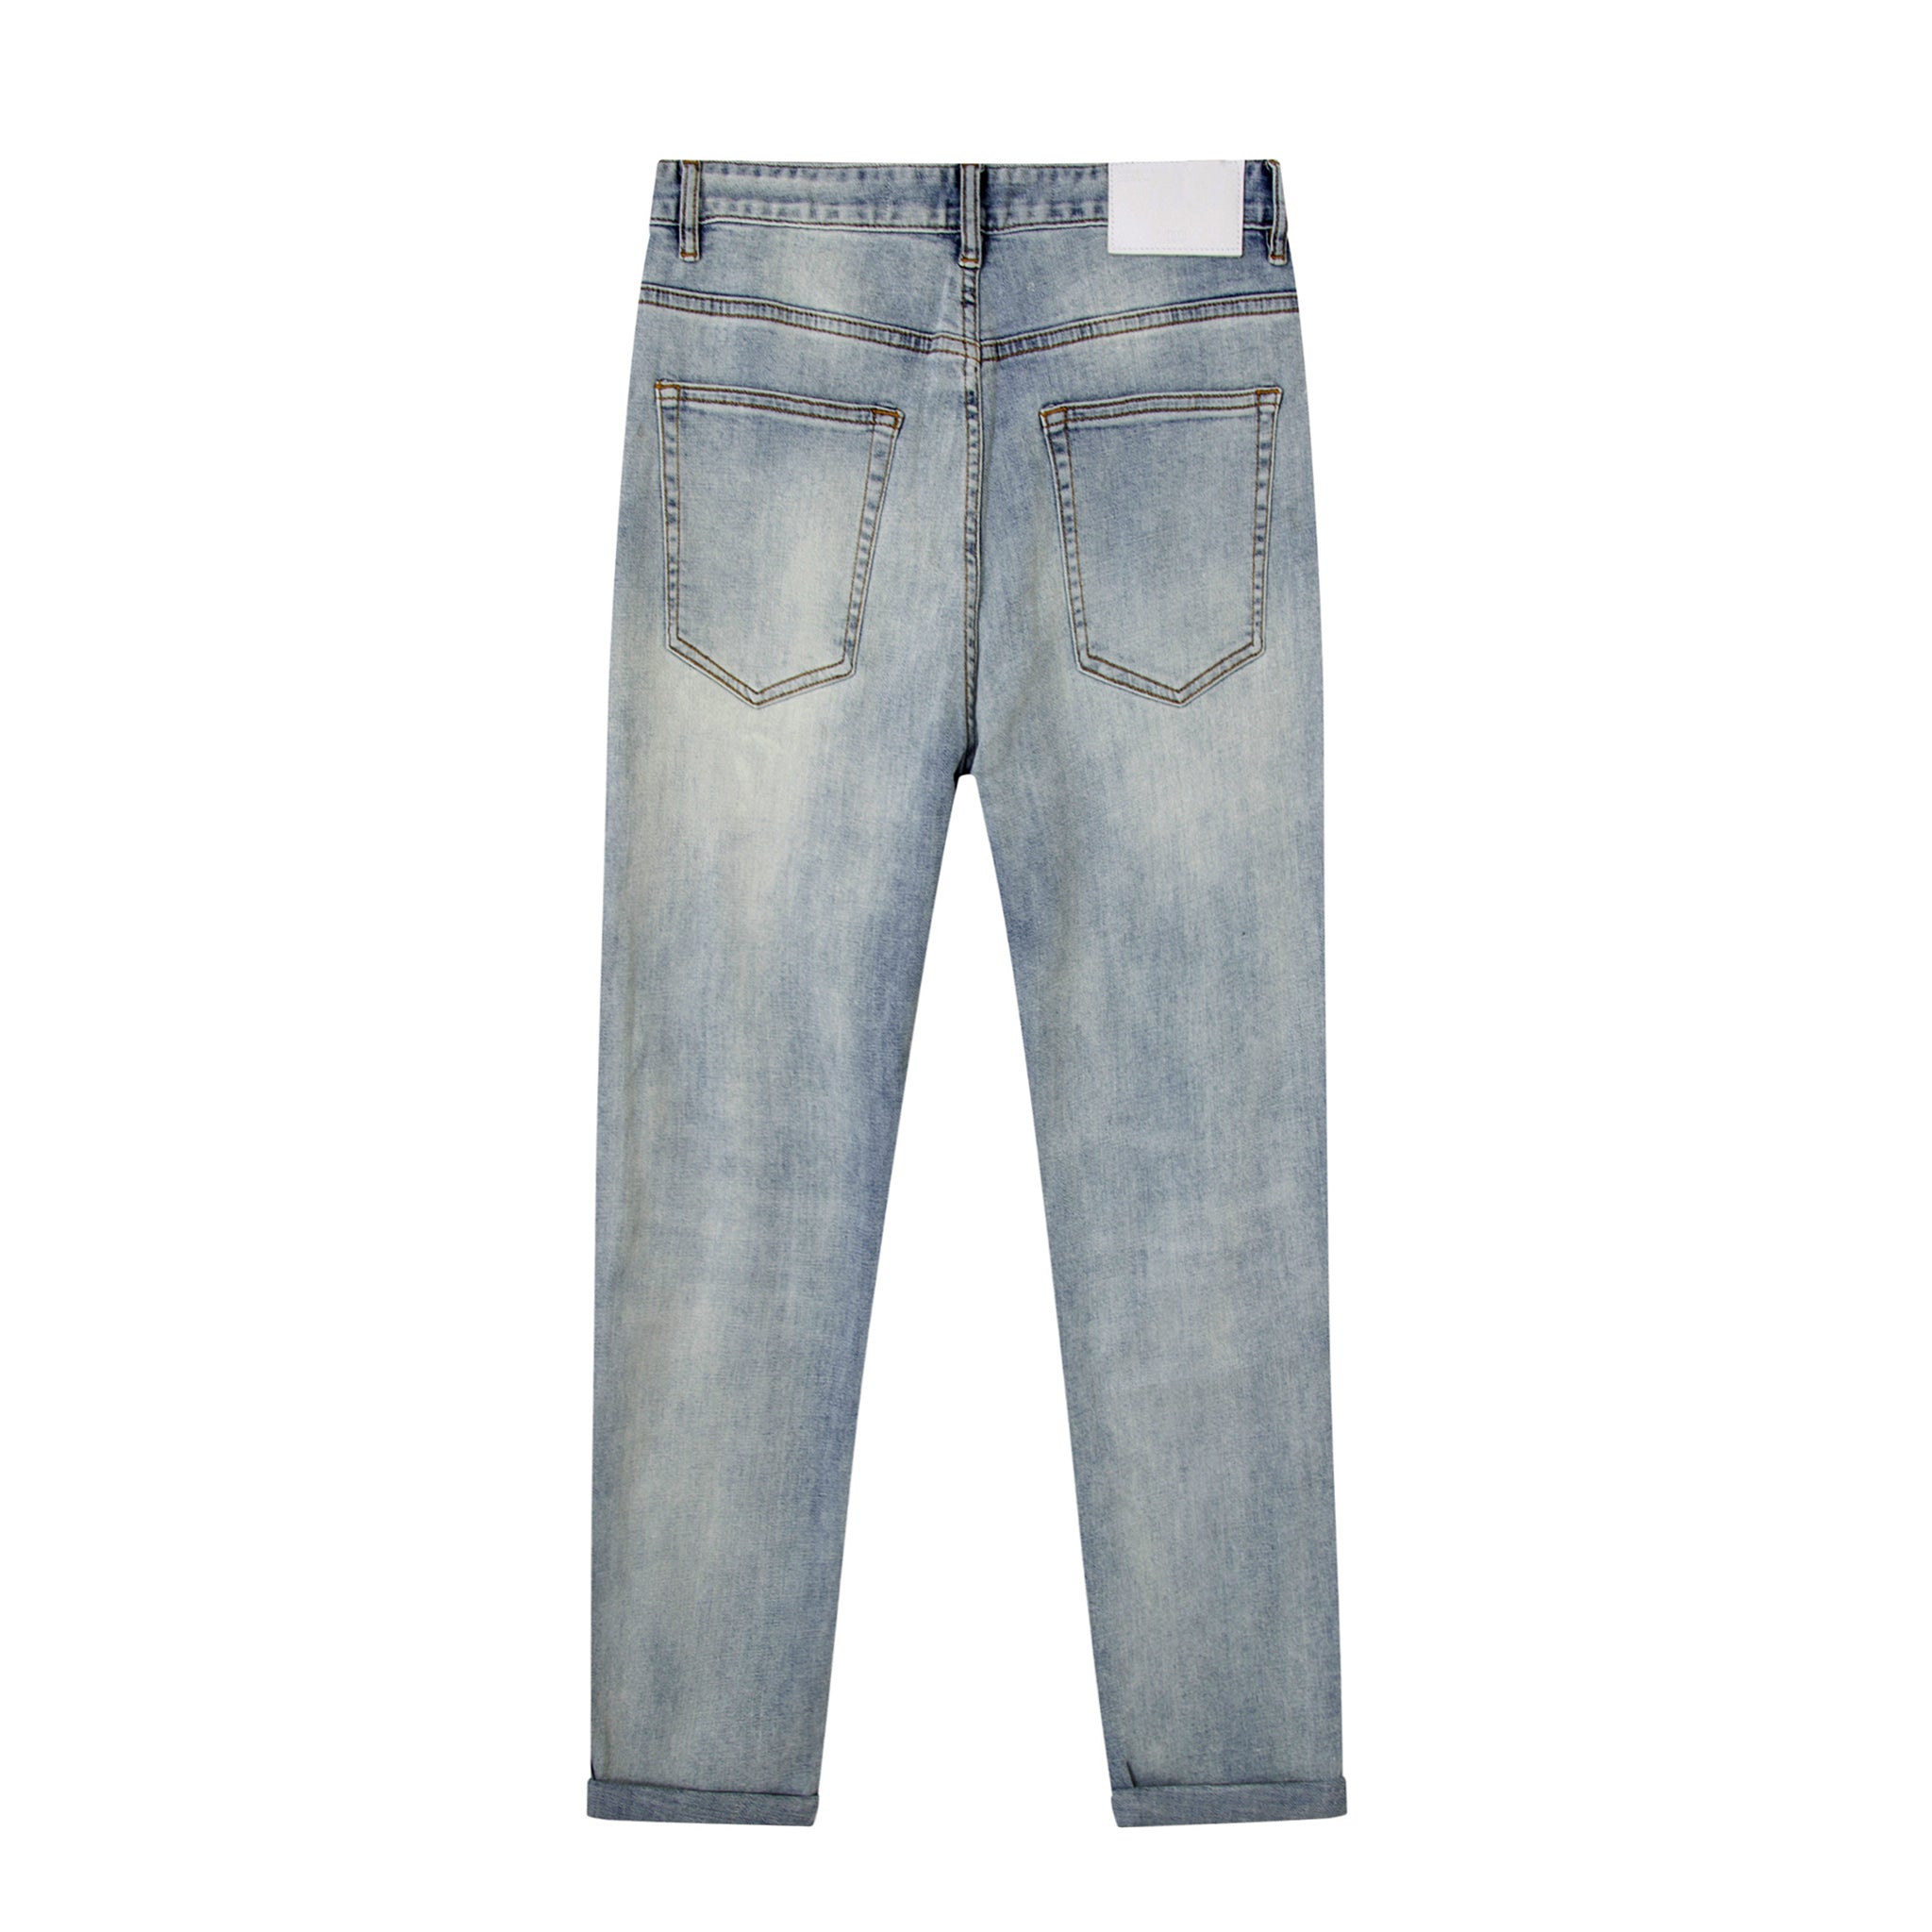 Classic Stone Wash Jeans